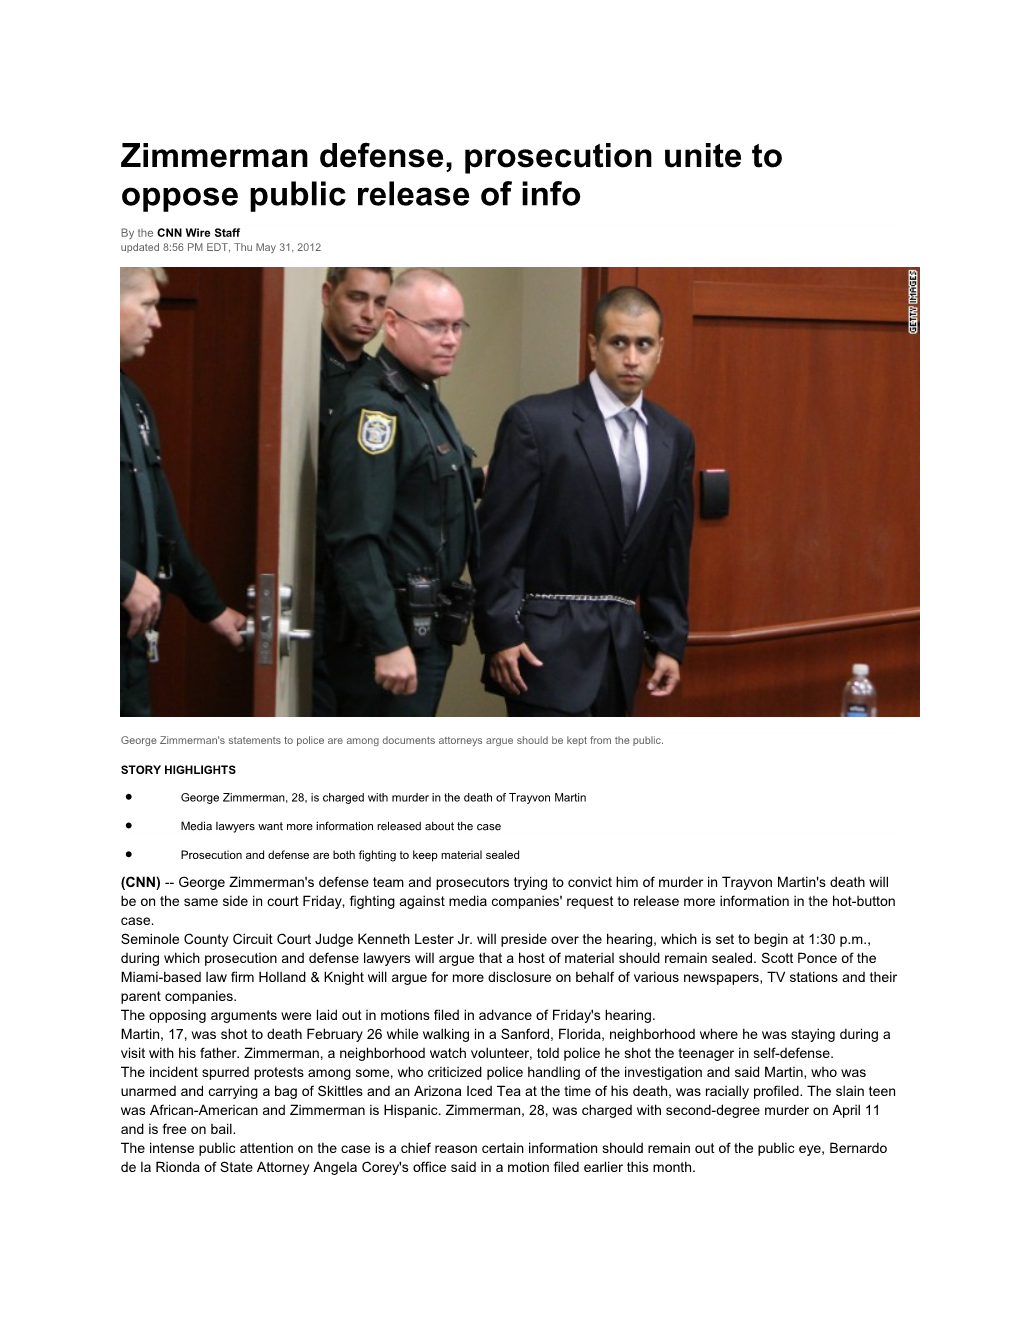 Zimmerman Defense, Prosecution Unite to Oppose Public Release of Info